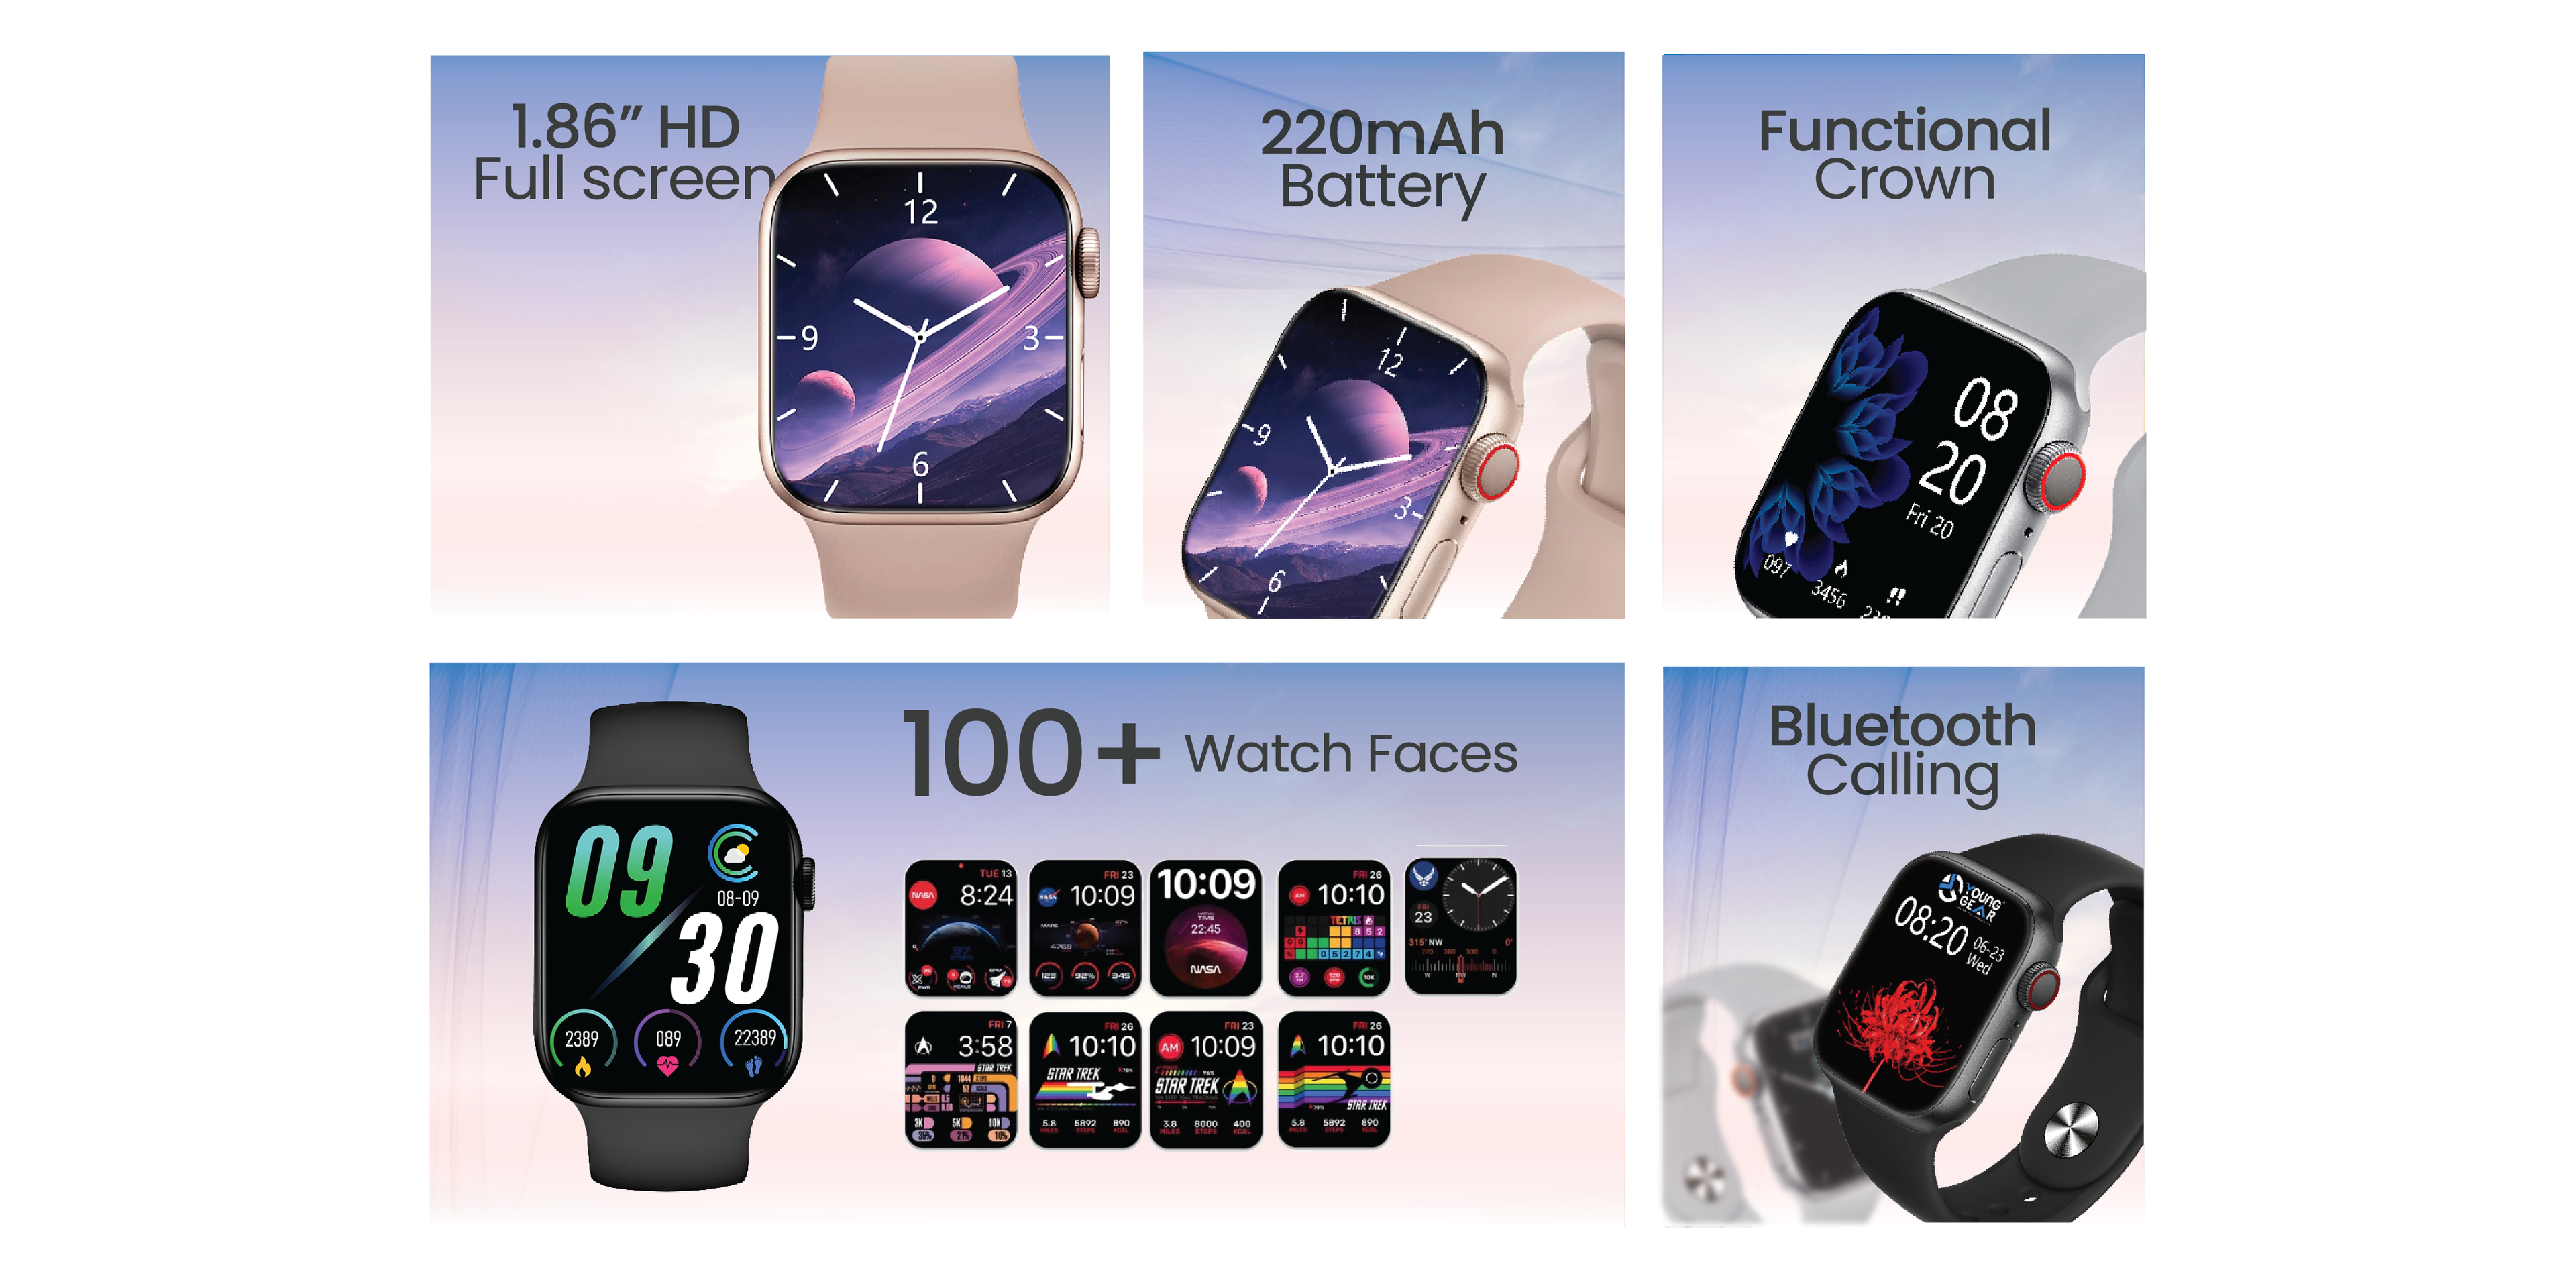 Younggear sky smartwatch features